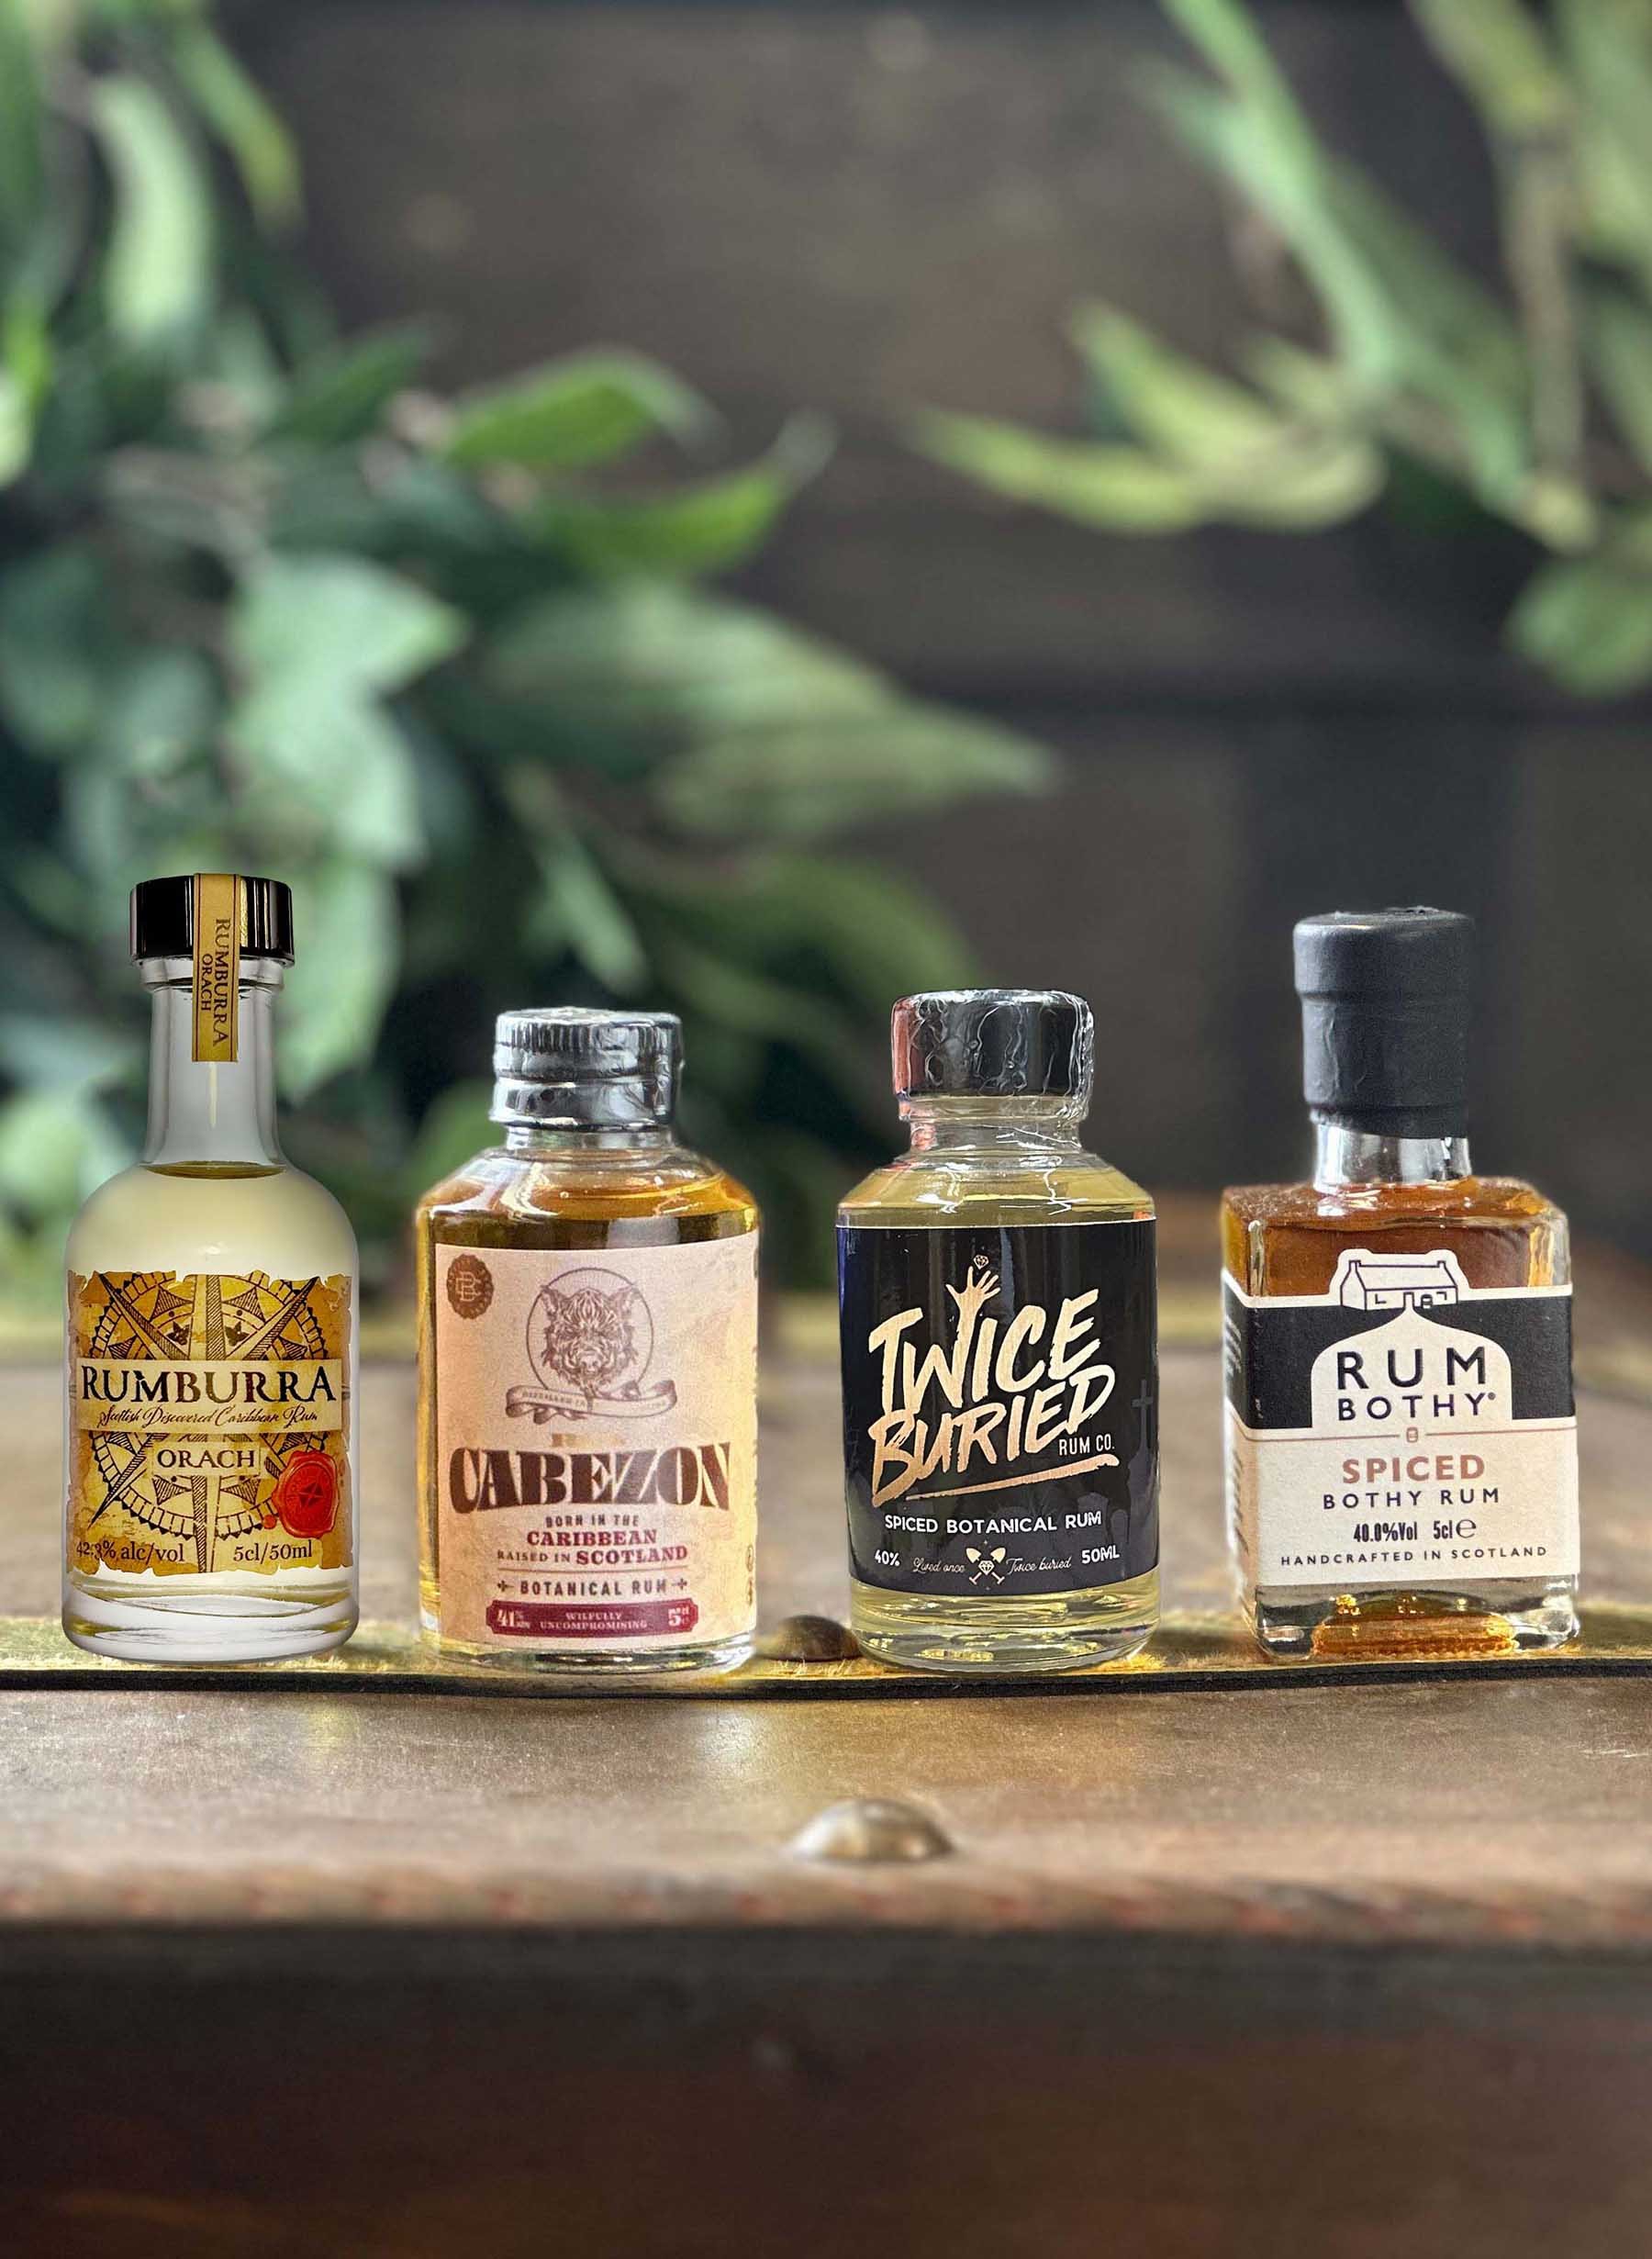 The Ultimate The Gift Box Rum | - | Online Rum Rum (12x50ml) Sets The Buy Gift Subscription — Company - Rum Rum Company